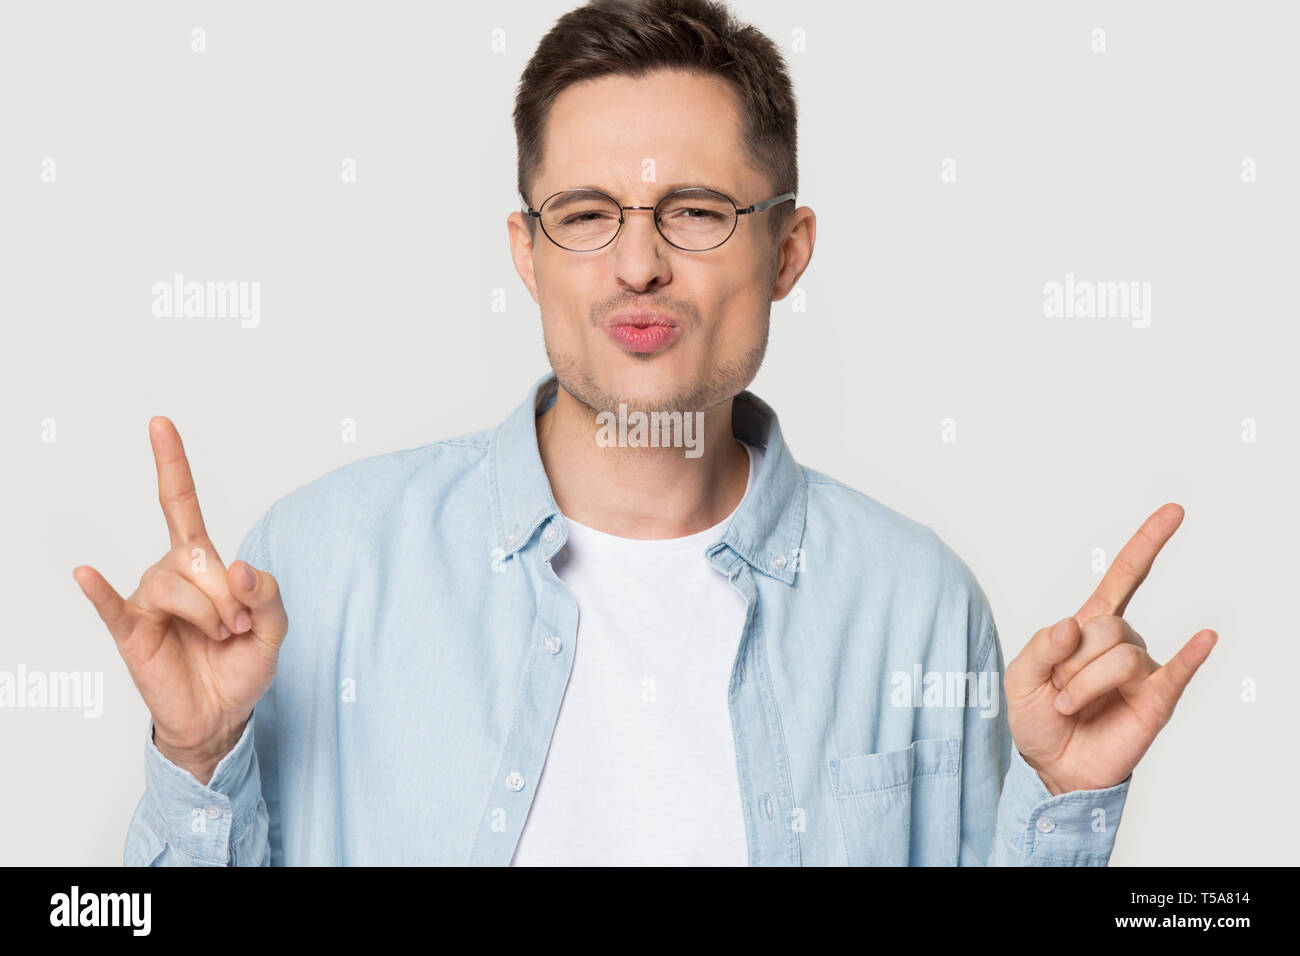 Caucasian man in glasses show cool rock hand gesture Stock Photo